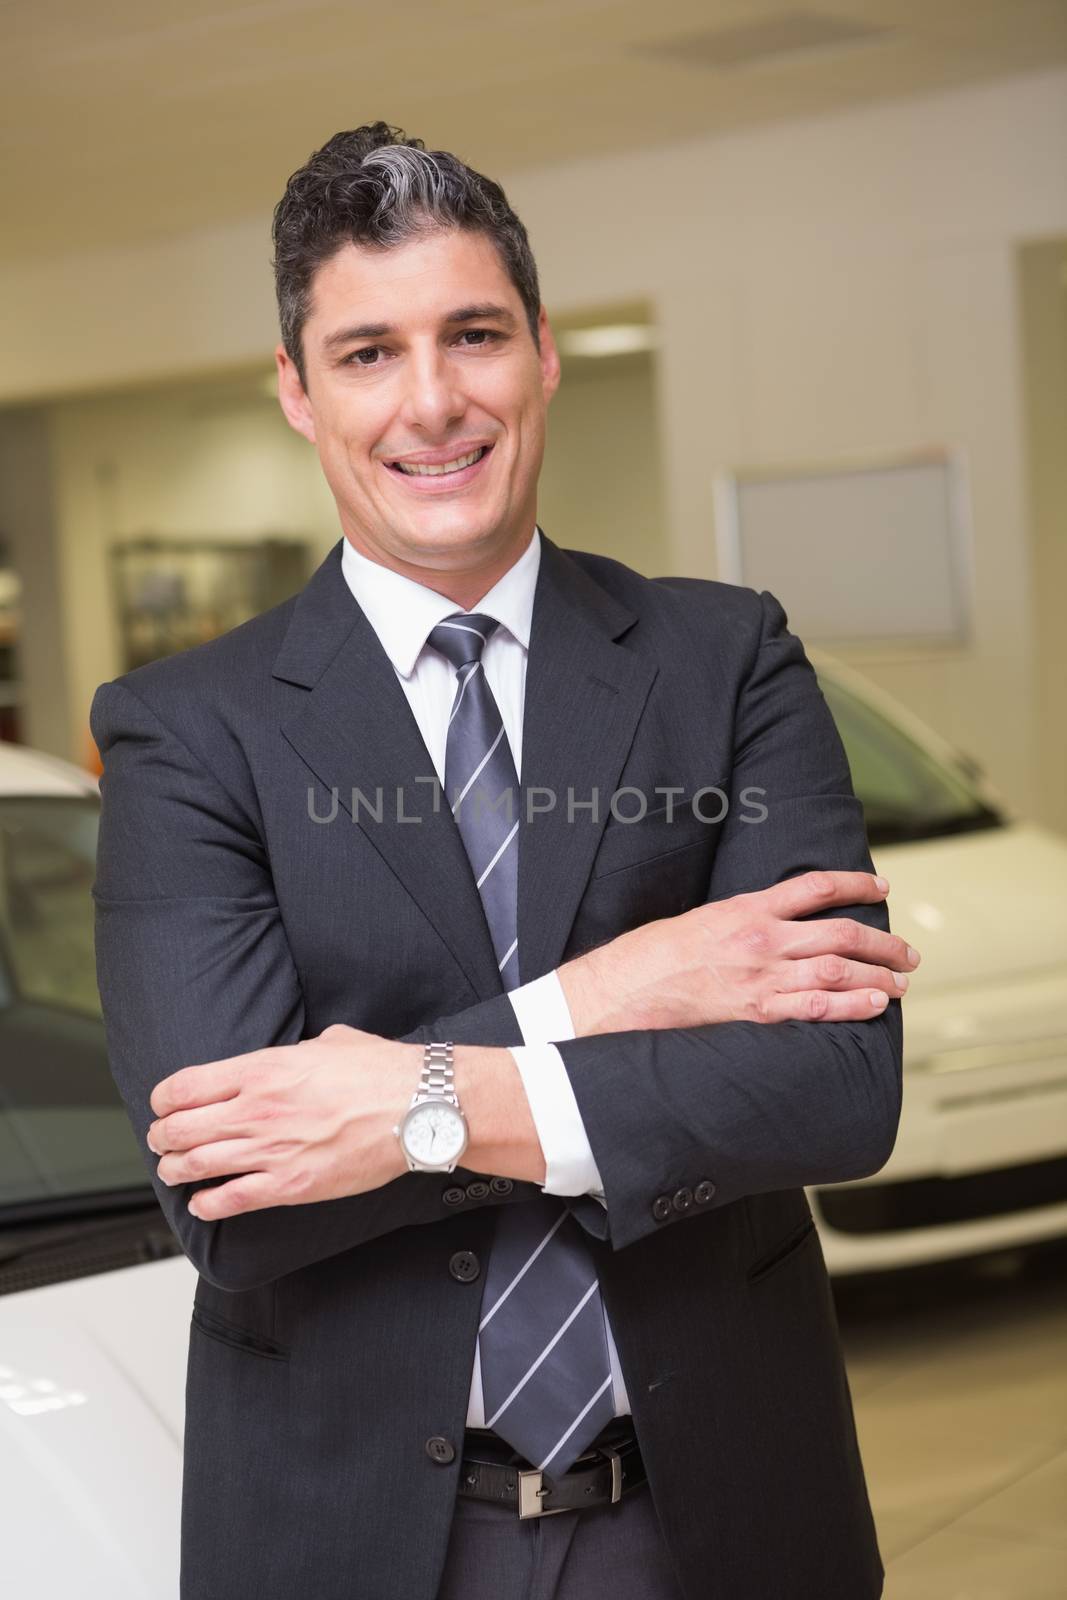 Smiling businessman standing with arms crossed at new car showroom